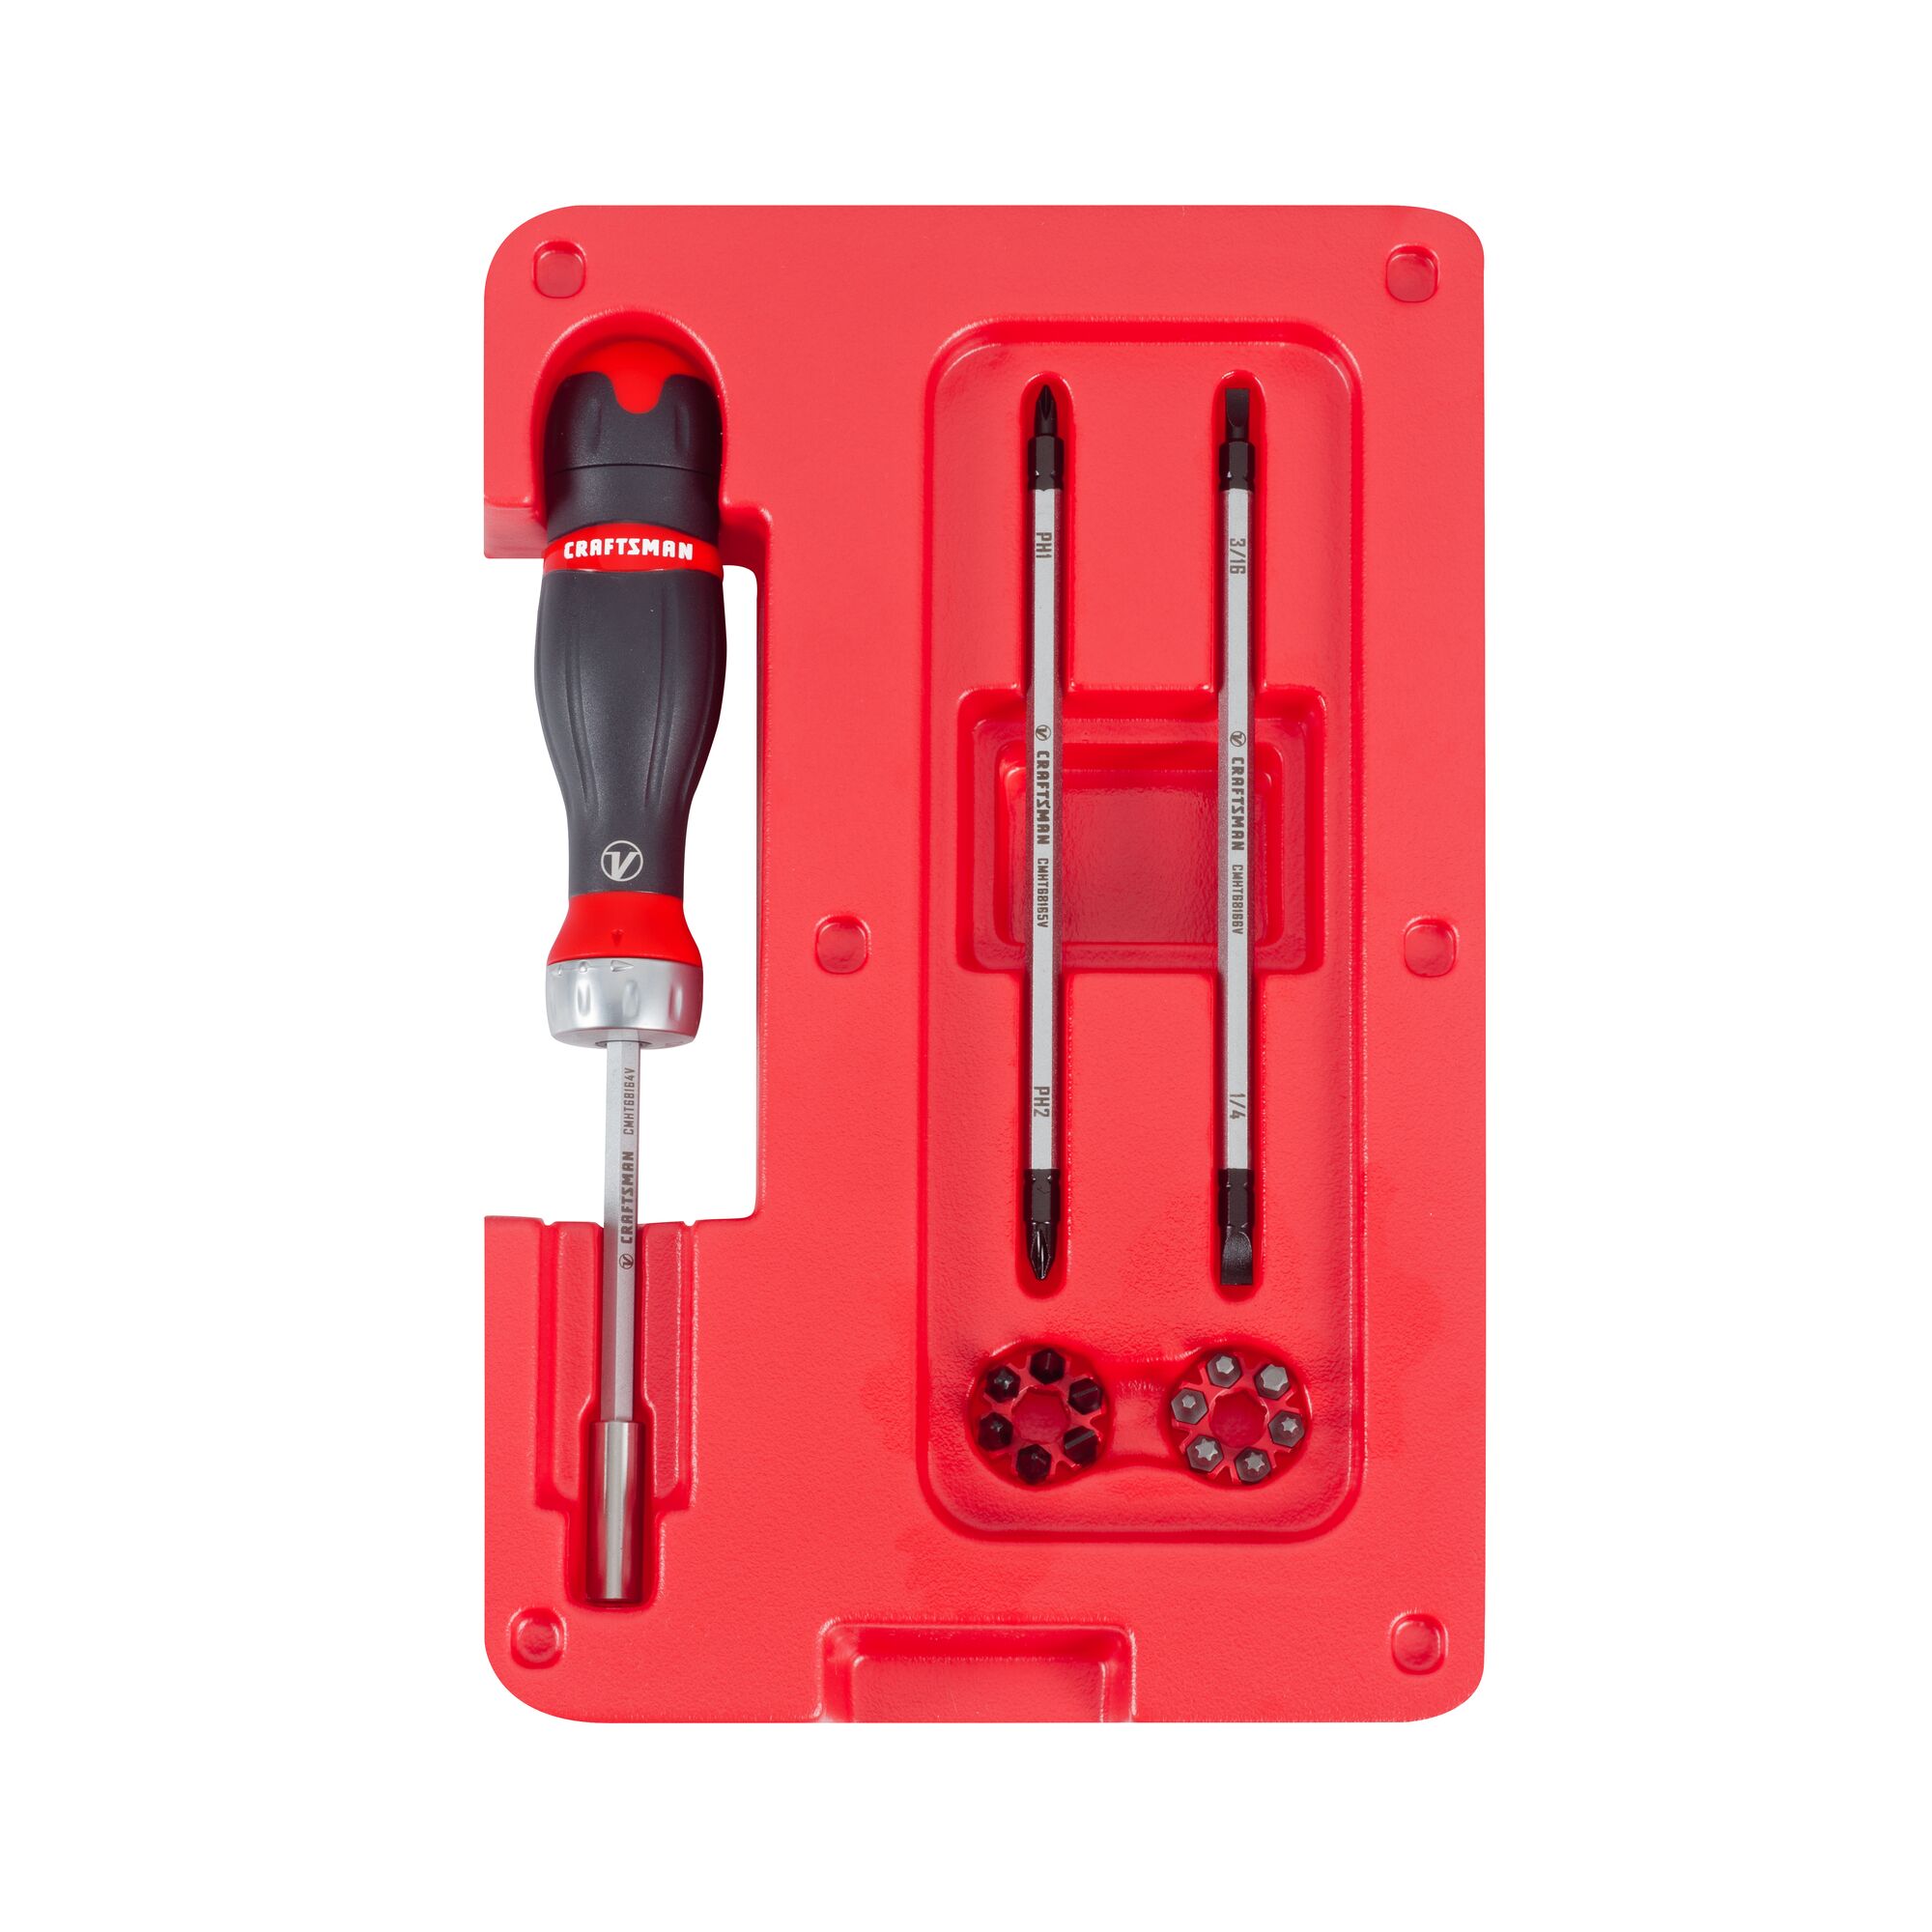 V Series 18 piece 3 in 1 Ratcheting ScrewDriver X Tract Technology Bit Set in packaging.